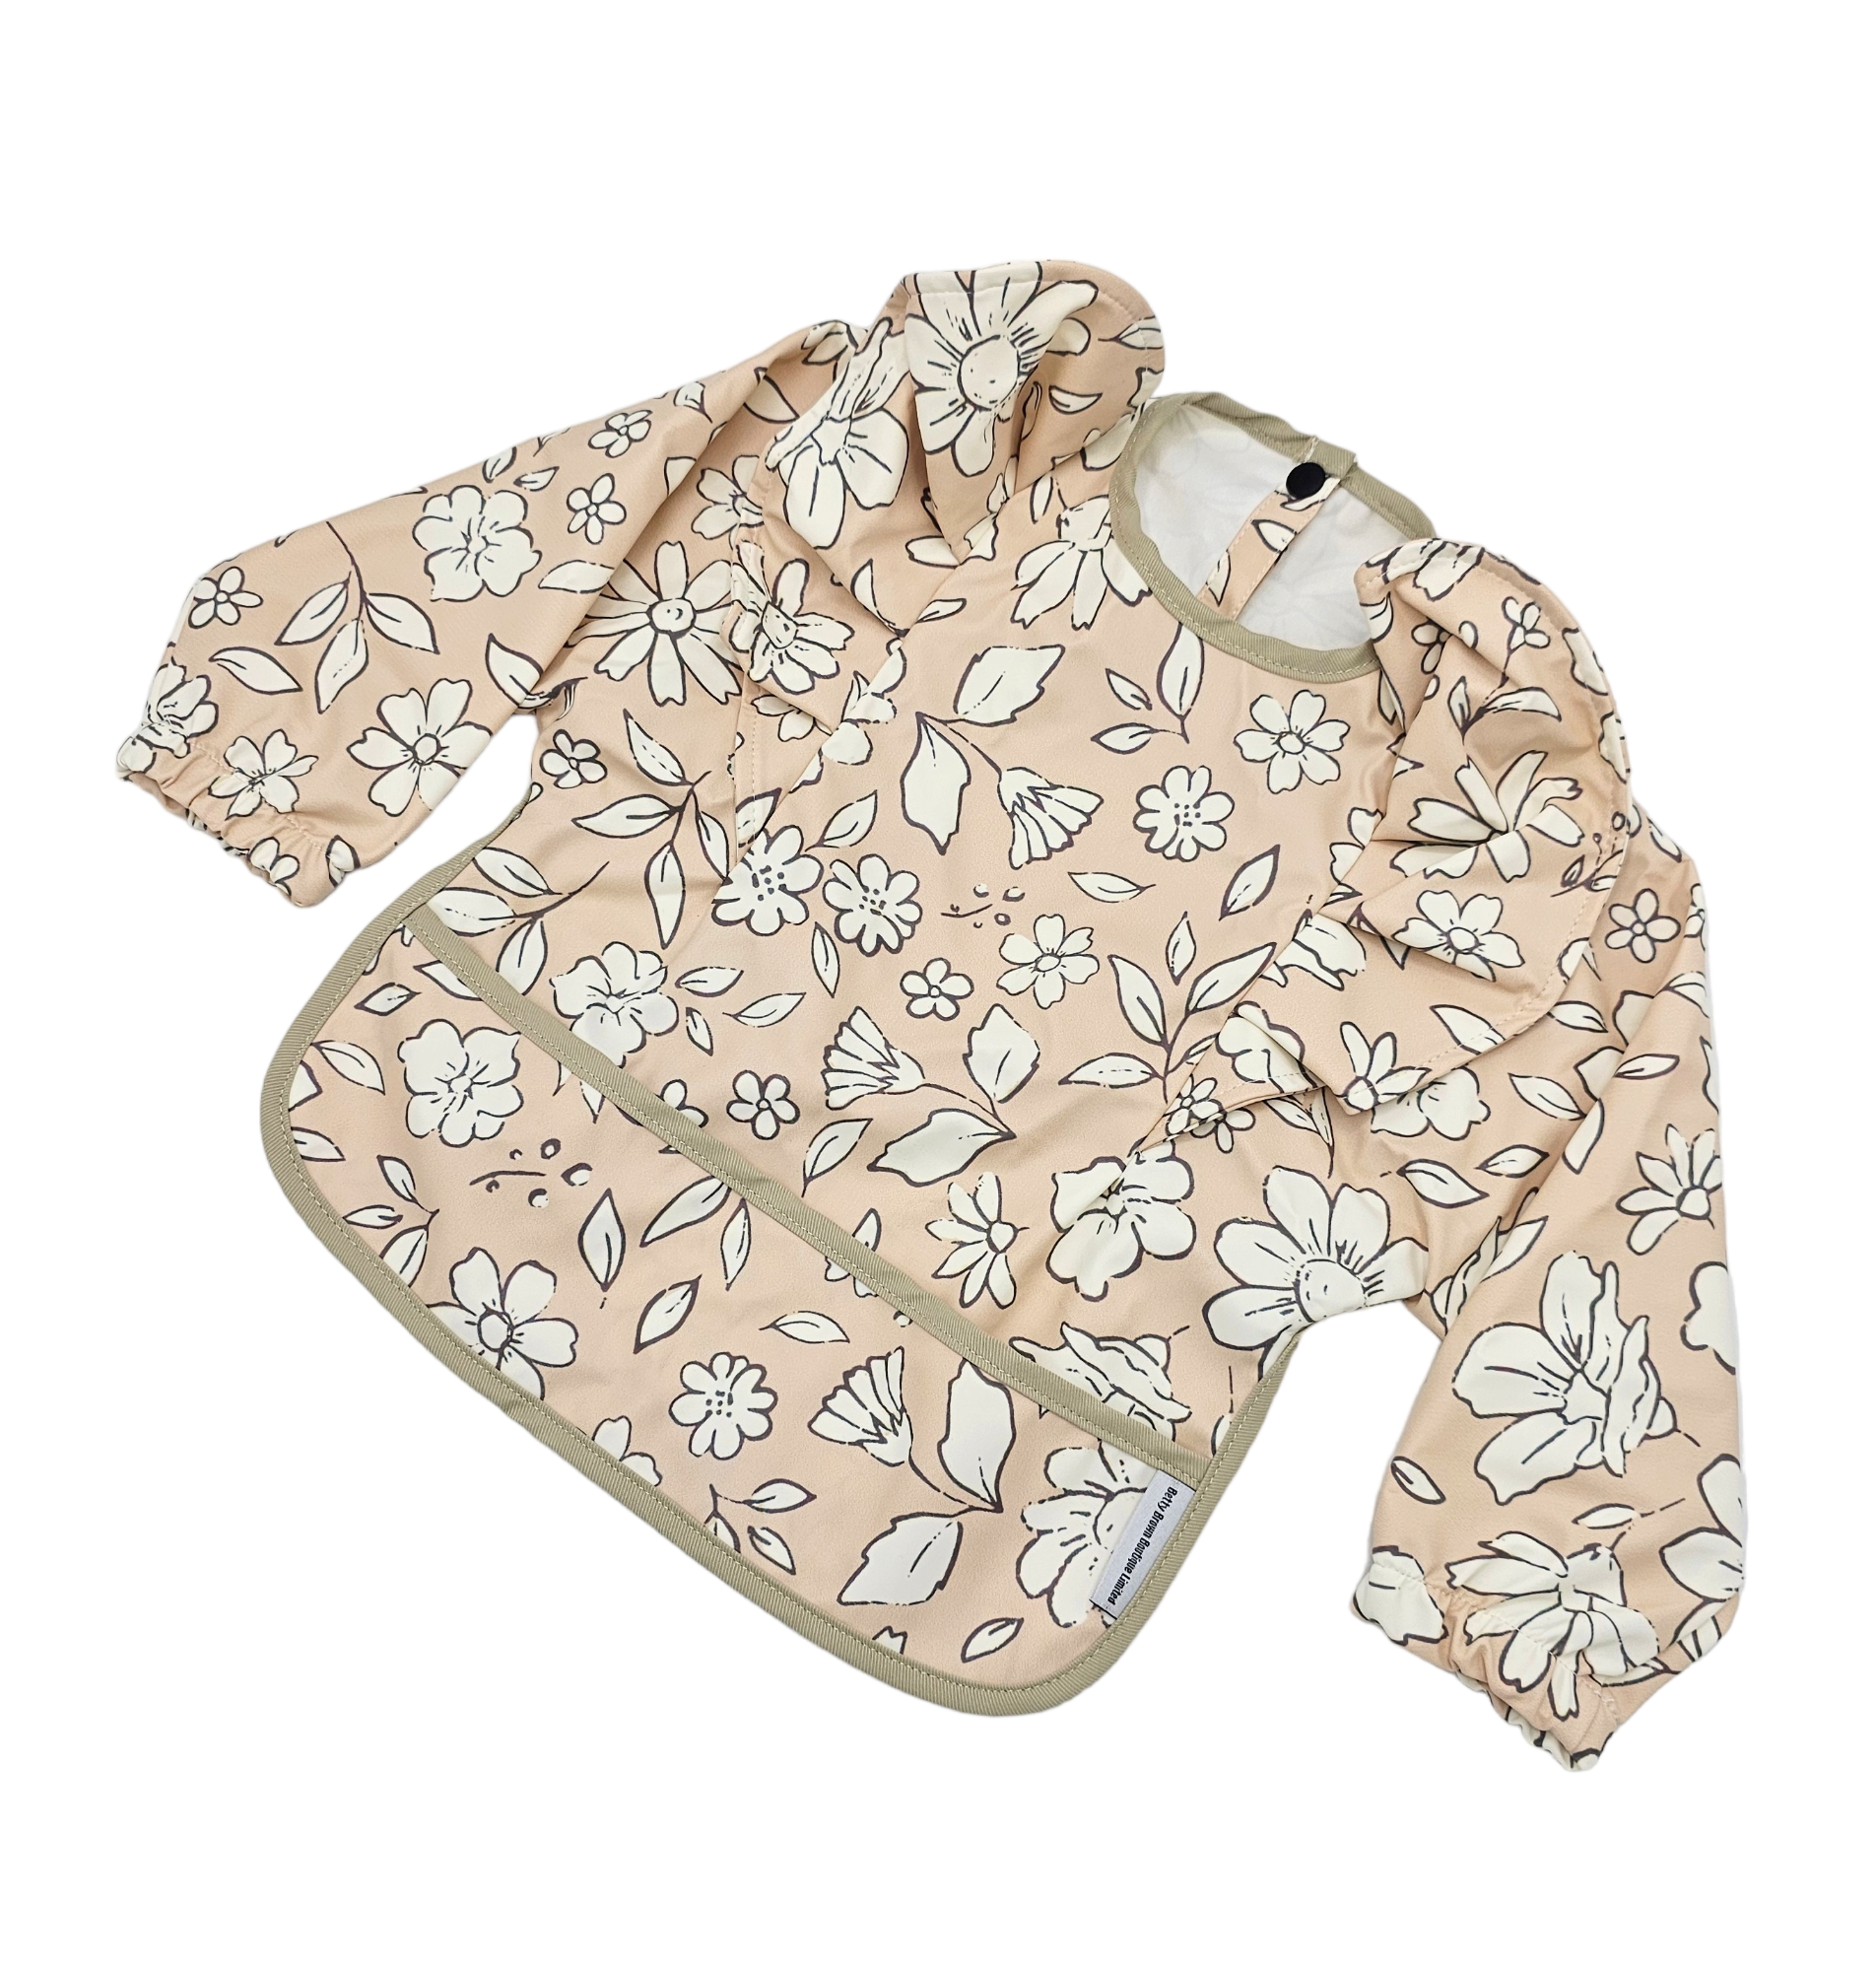 Beige Floral Frill Detail Waterproof Bib with Sleeves - Betty Brown Boutique Ltd